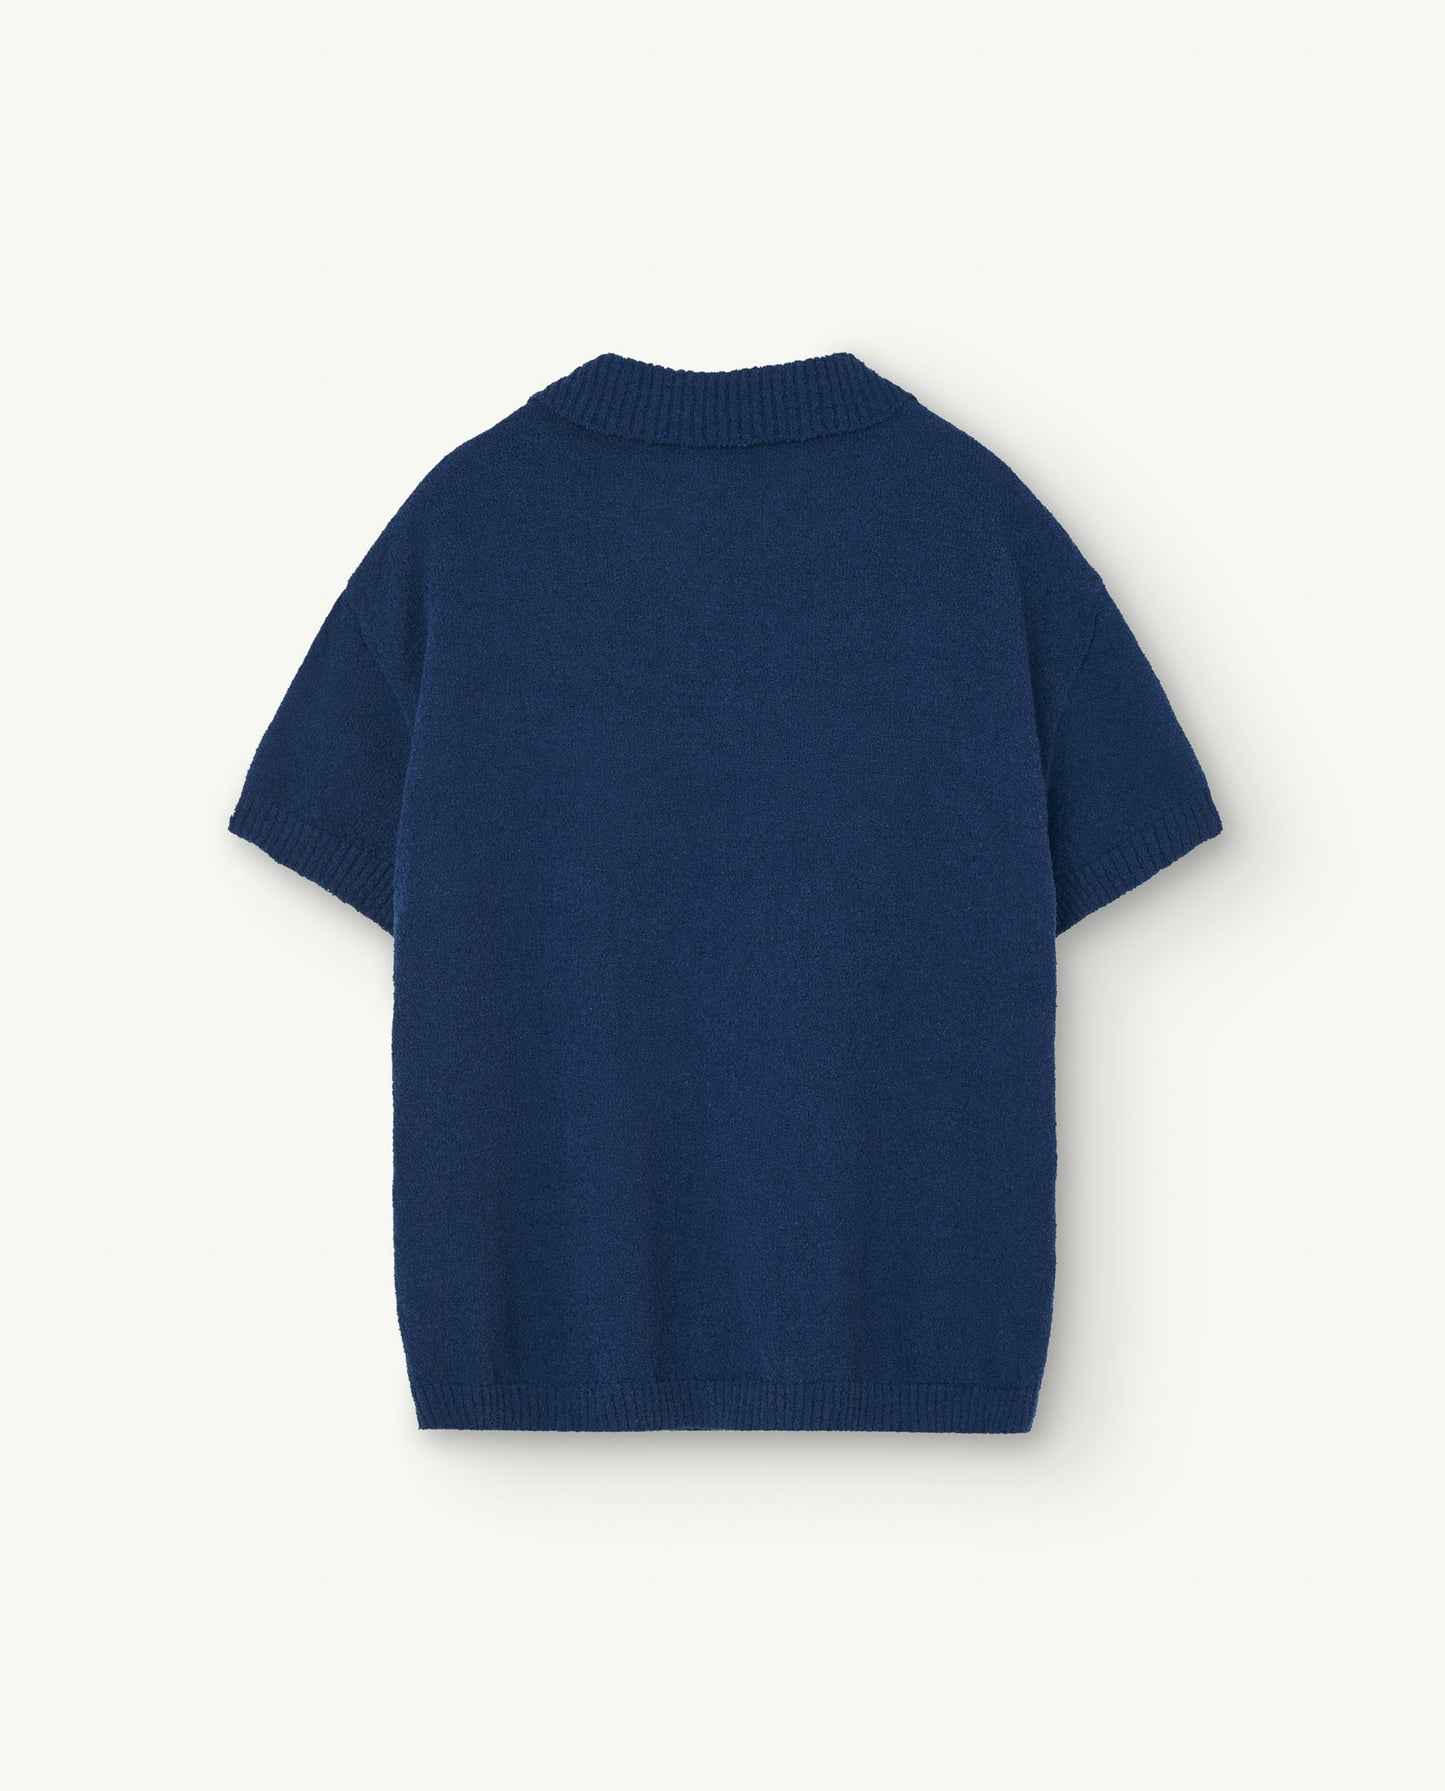 The Whale Short Sleeve Cardigan